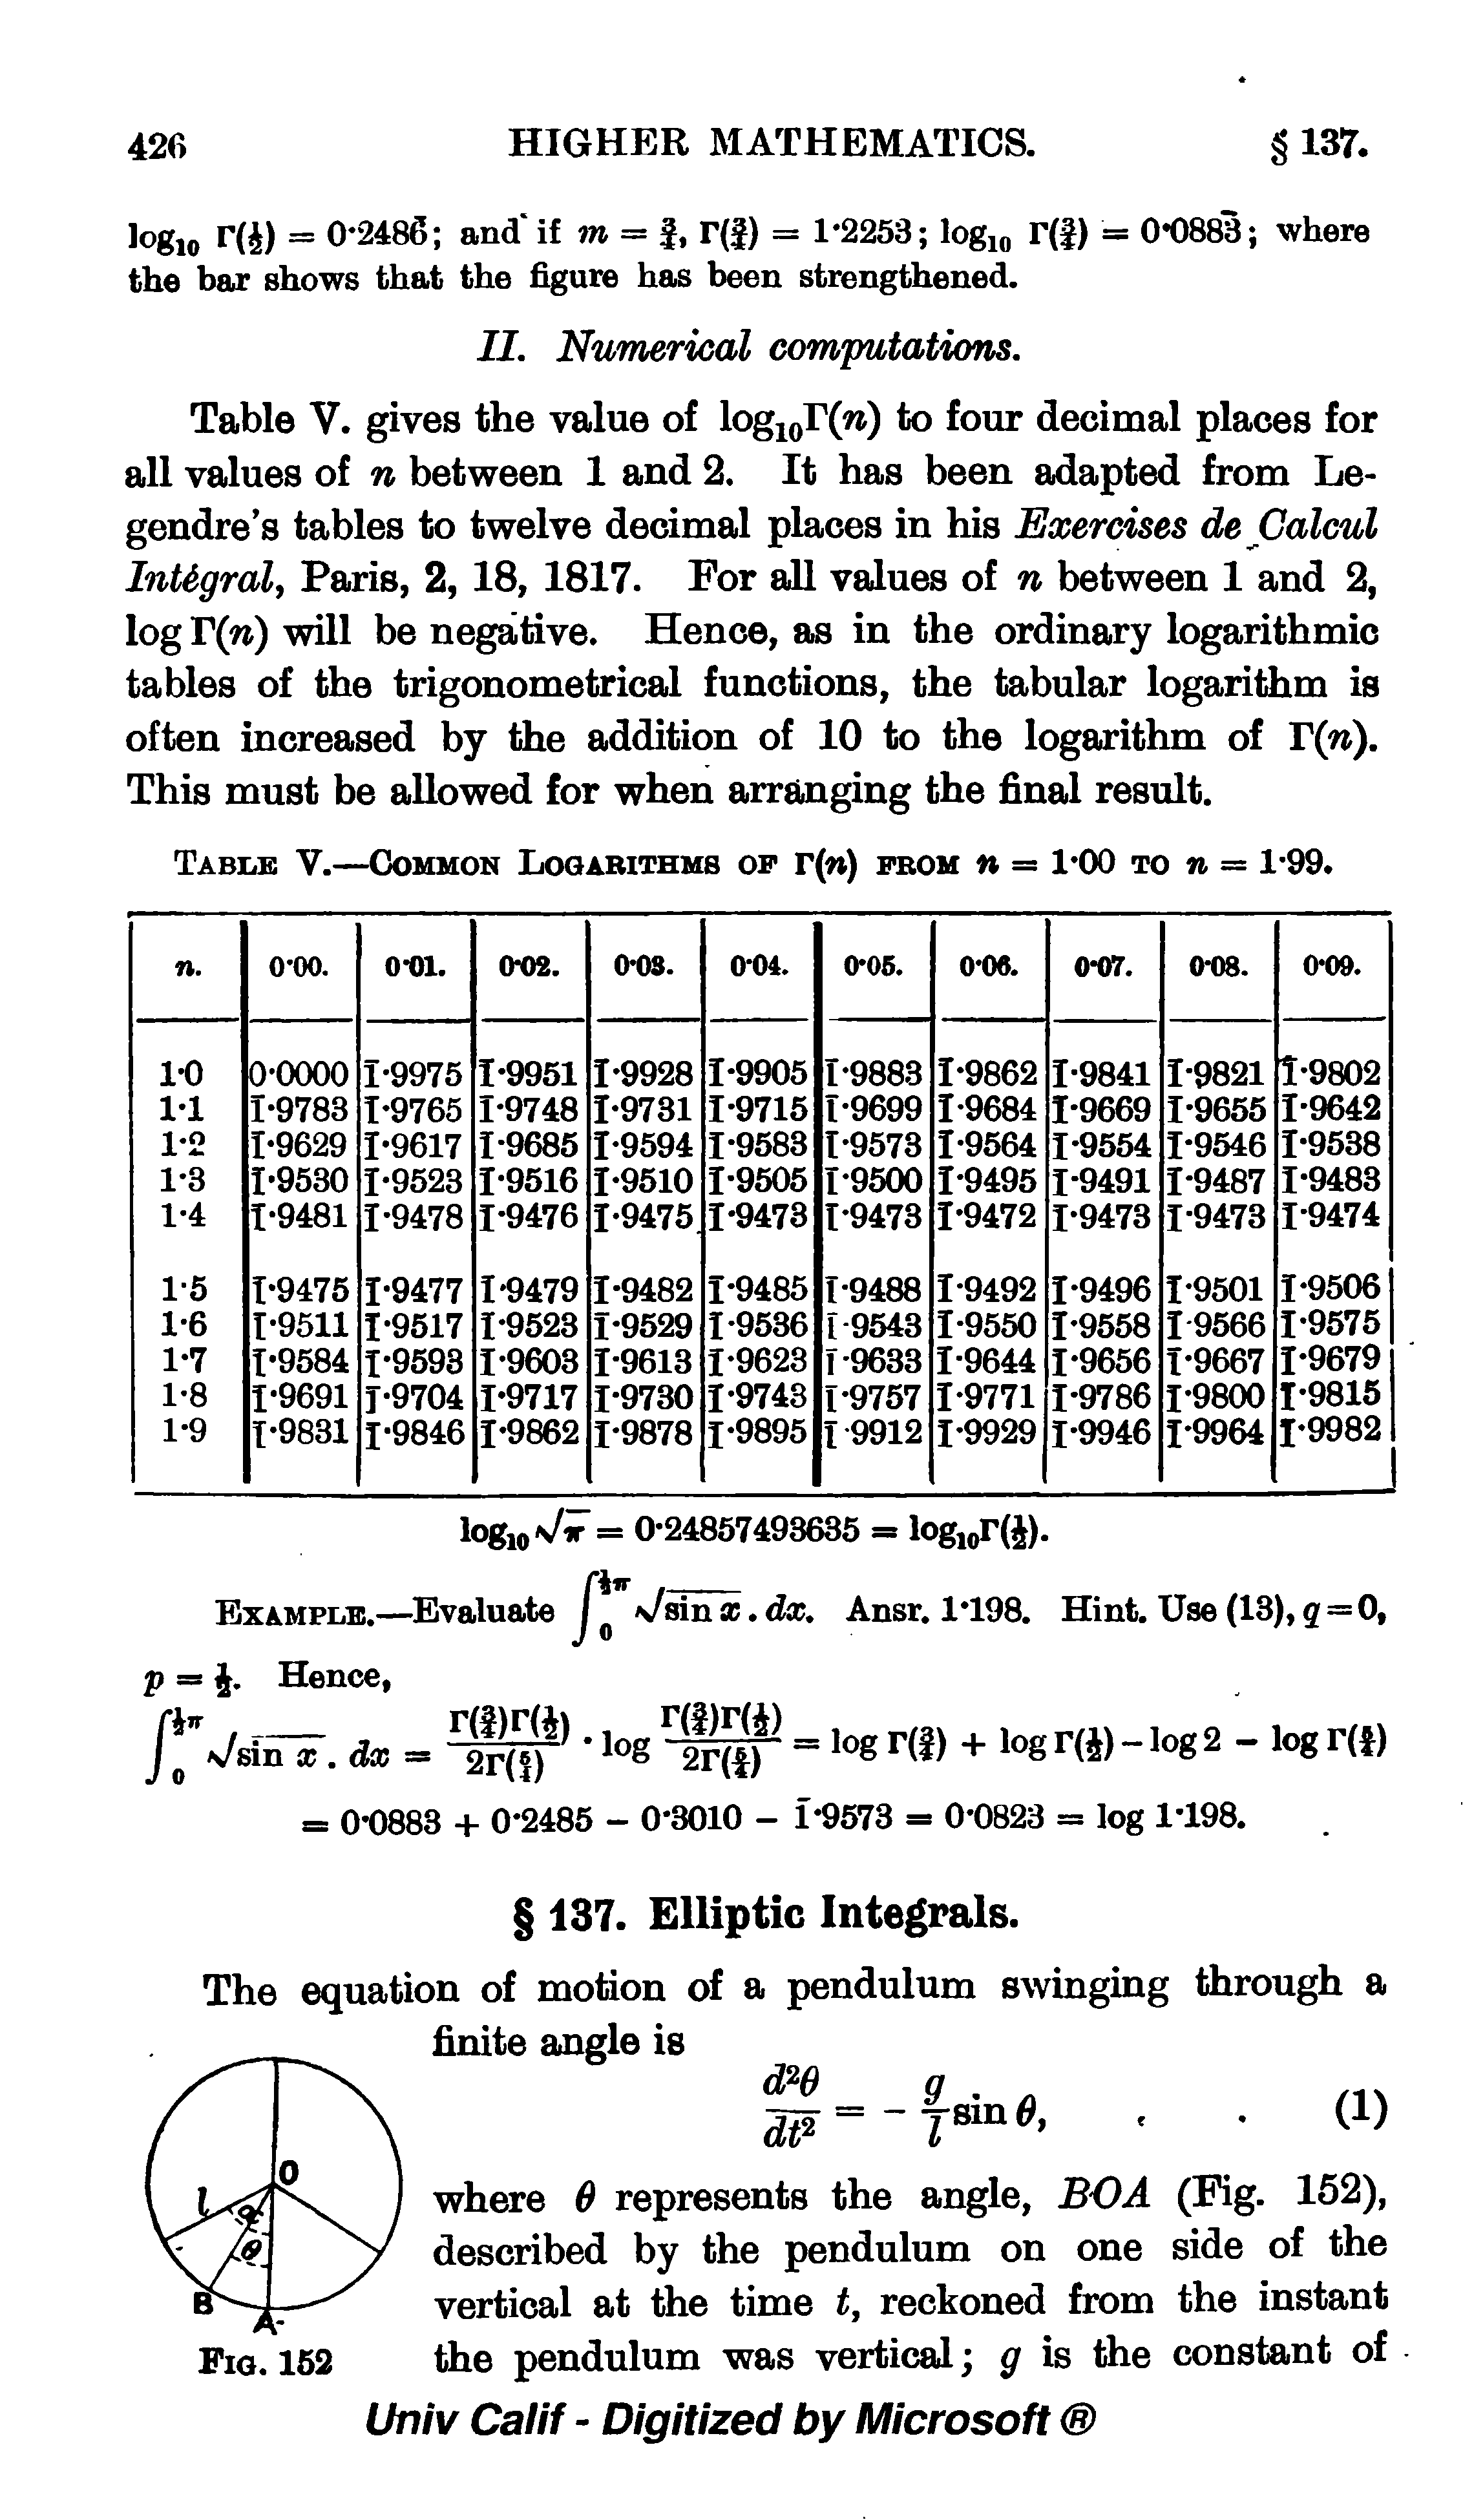 Table V. gives the value of log10r(w) to four decimal places for all values of n between 1 and 2. It has been adapted from Legendre s tables to twelve decimal places in his Exercises de Calcul Integral, Paris, 2, 18, 1817. For all values of n between 1 and 2, log T(w) will be negative. Hence, as in the ordinary logarithmic tables of the trigonometrical functions, the tabular logarithm is often increased by the addition of 10 to the logarithm of T(w). This must be allowed for when arranging the final result.